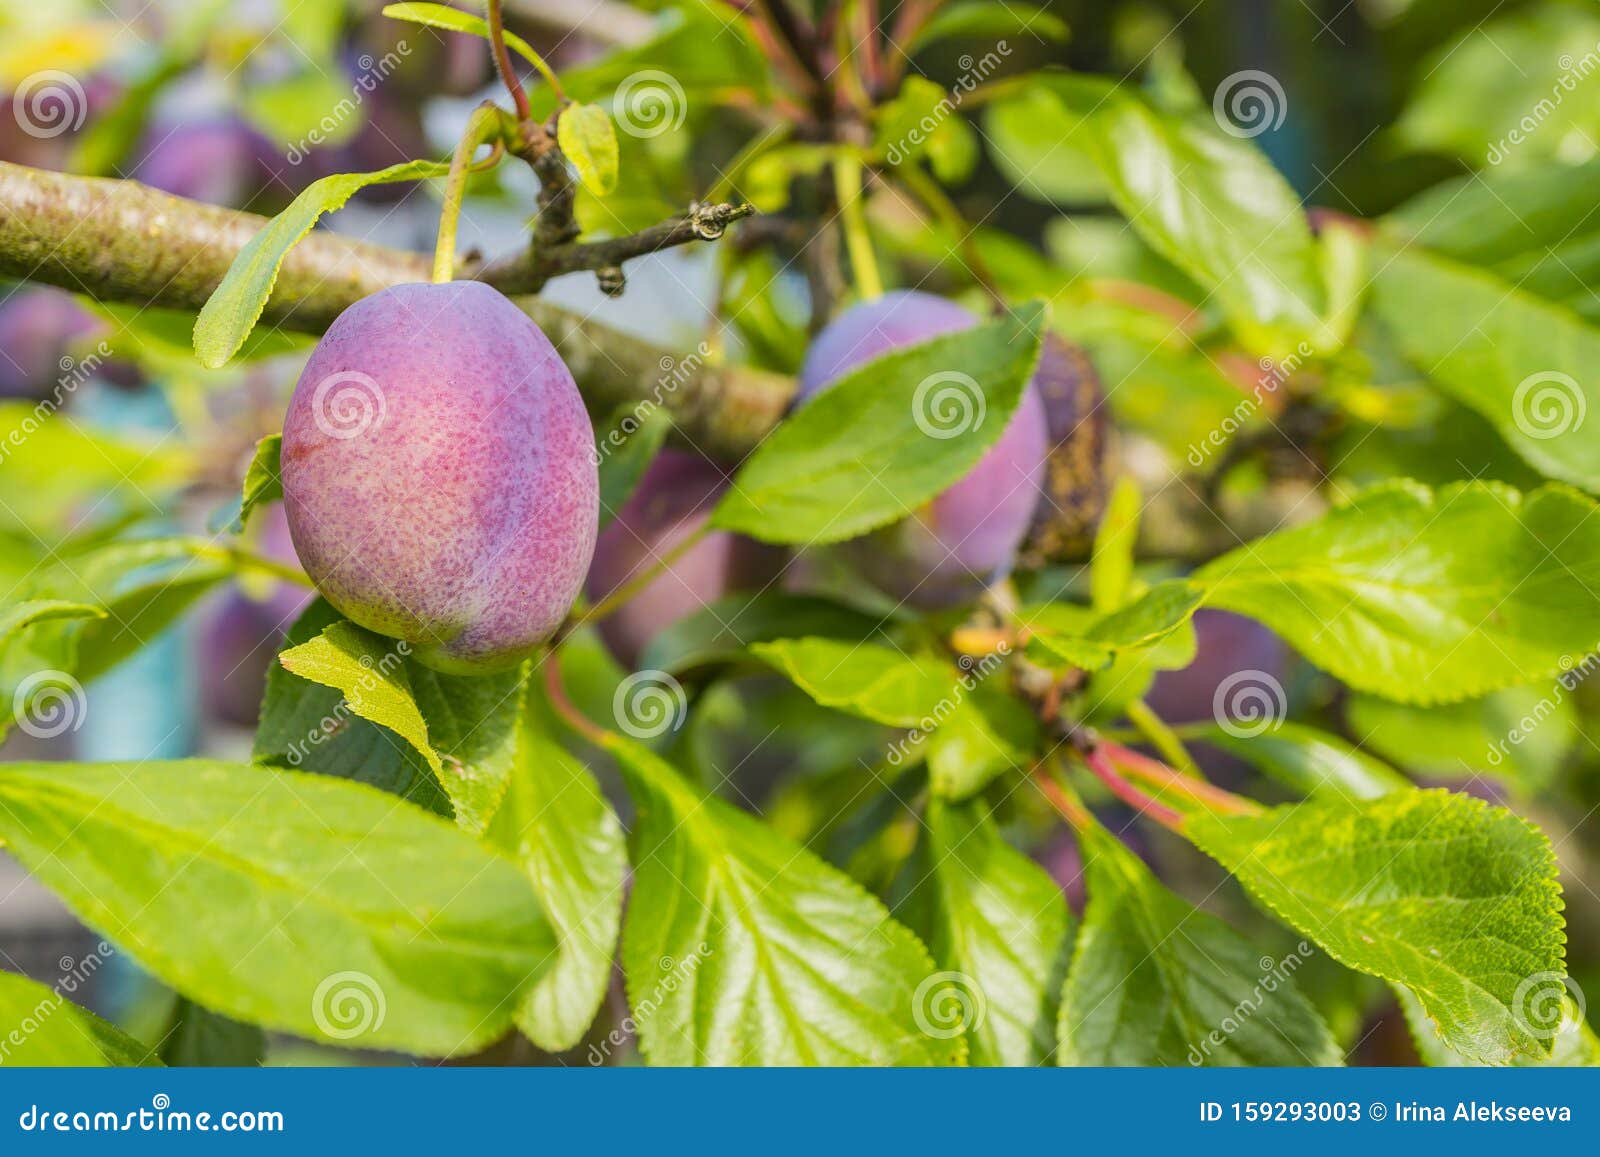 mature purple plum prunus domestica on the branches of a tree. soft focus. selective focus